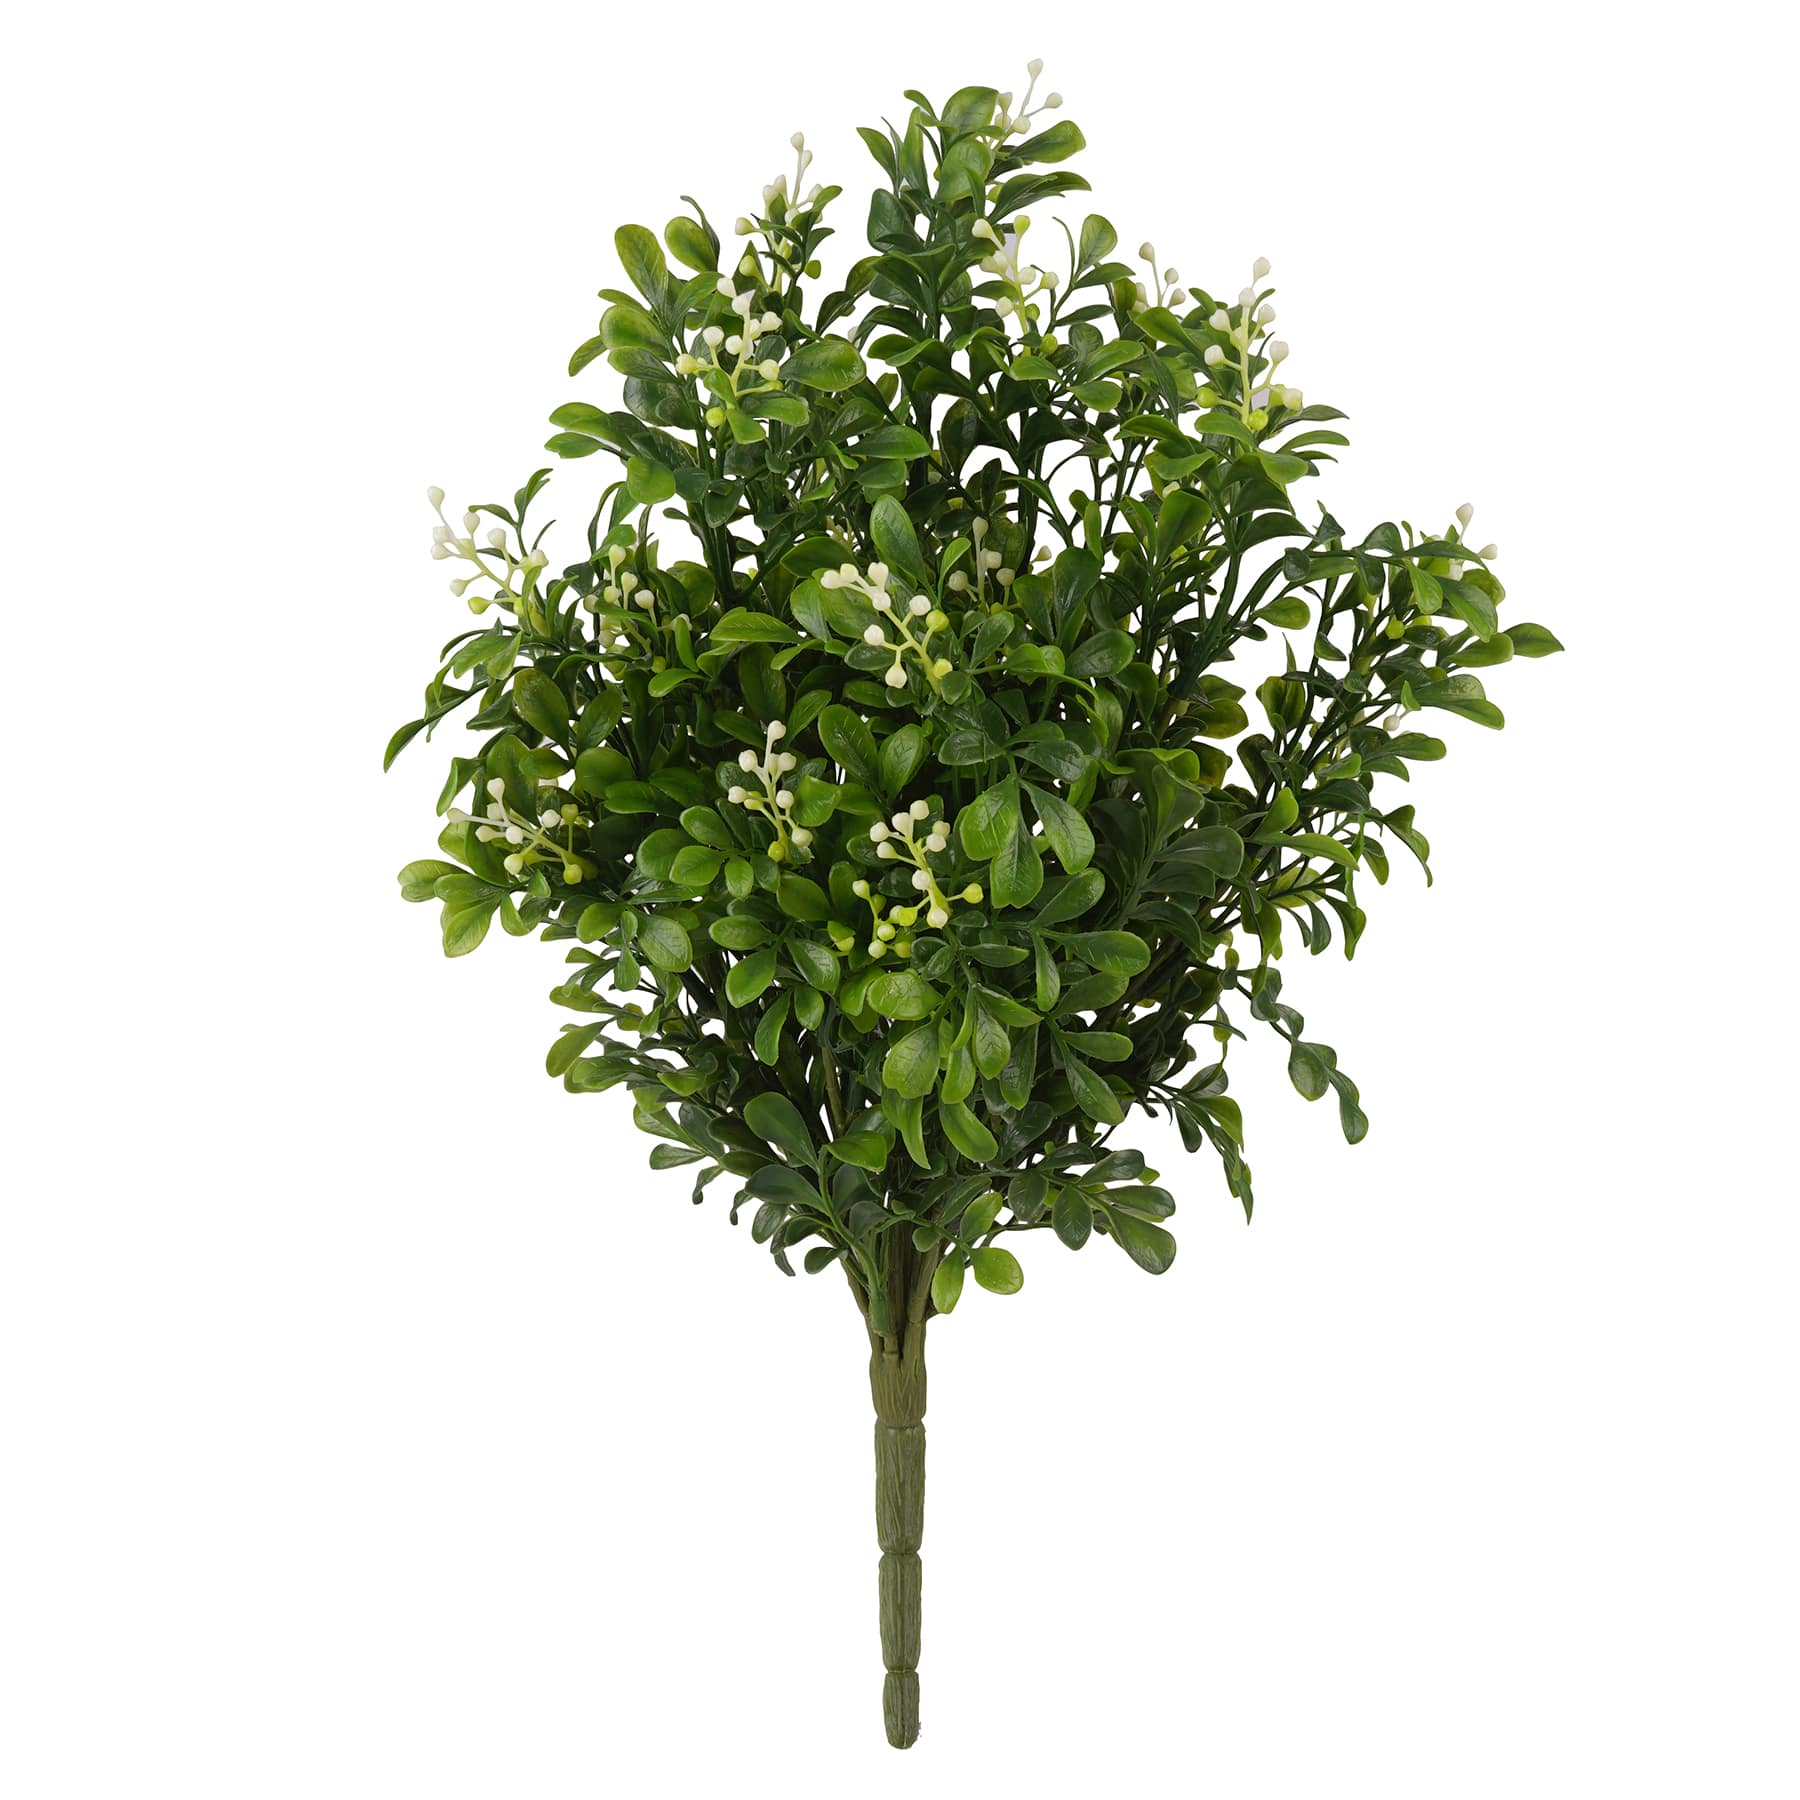 Spring Florals Faux Greenery Boxwood Berry Bush